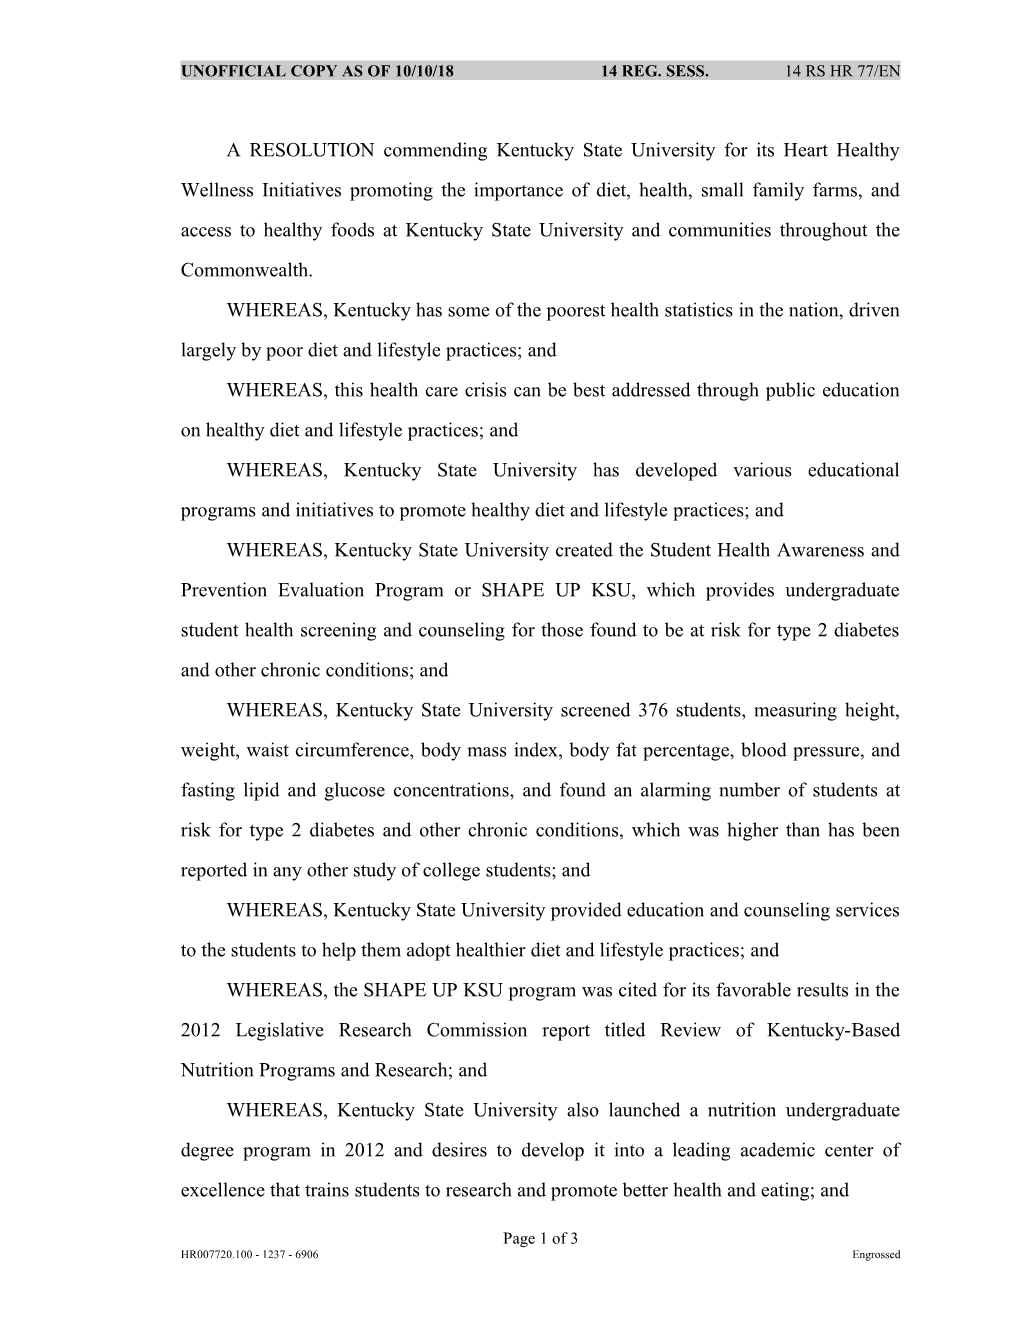 A RESOLUTION Commending Kentucky State University for Its Heart Healthy Wellness Initiatives